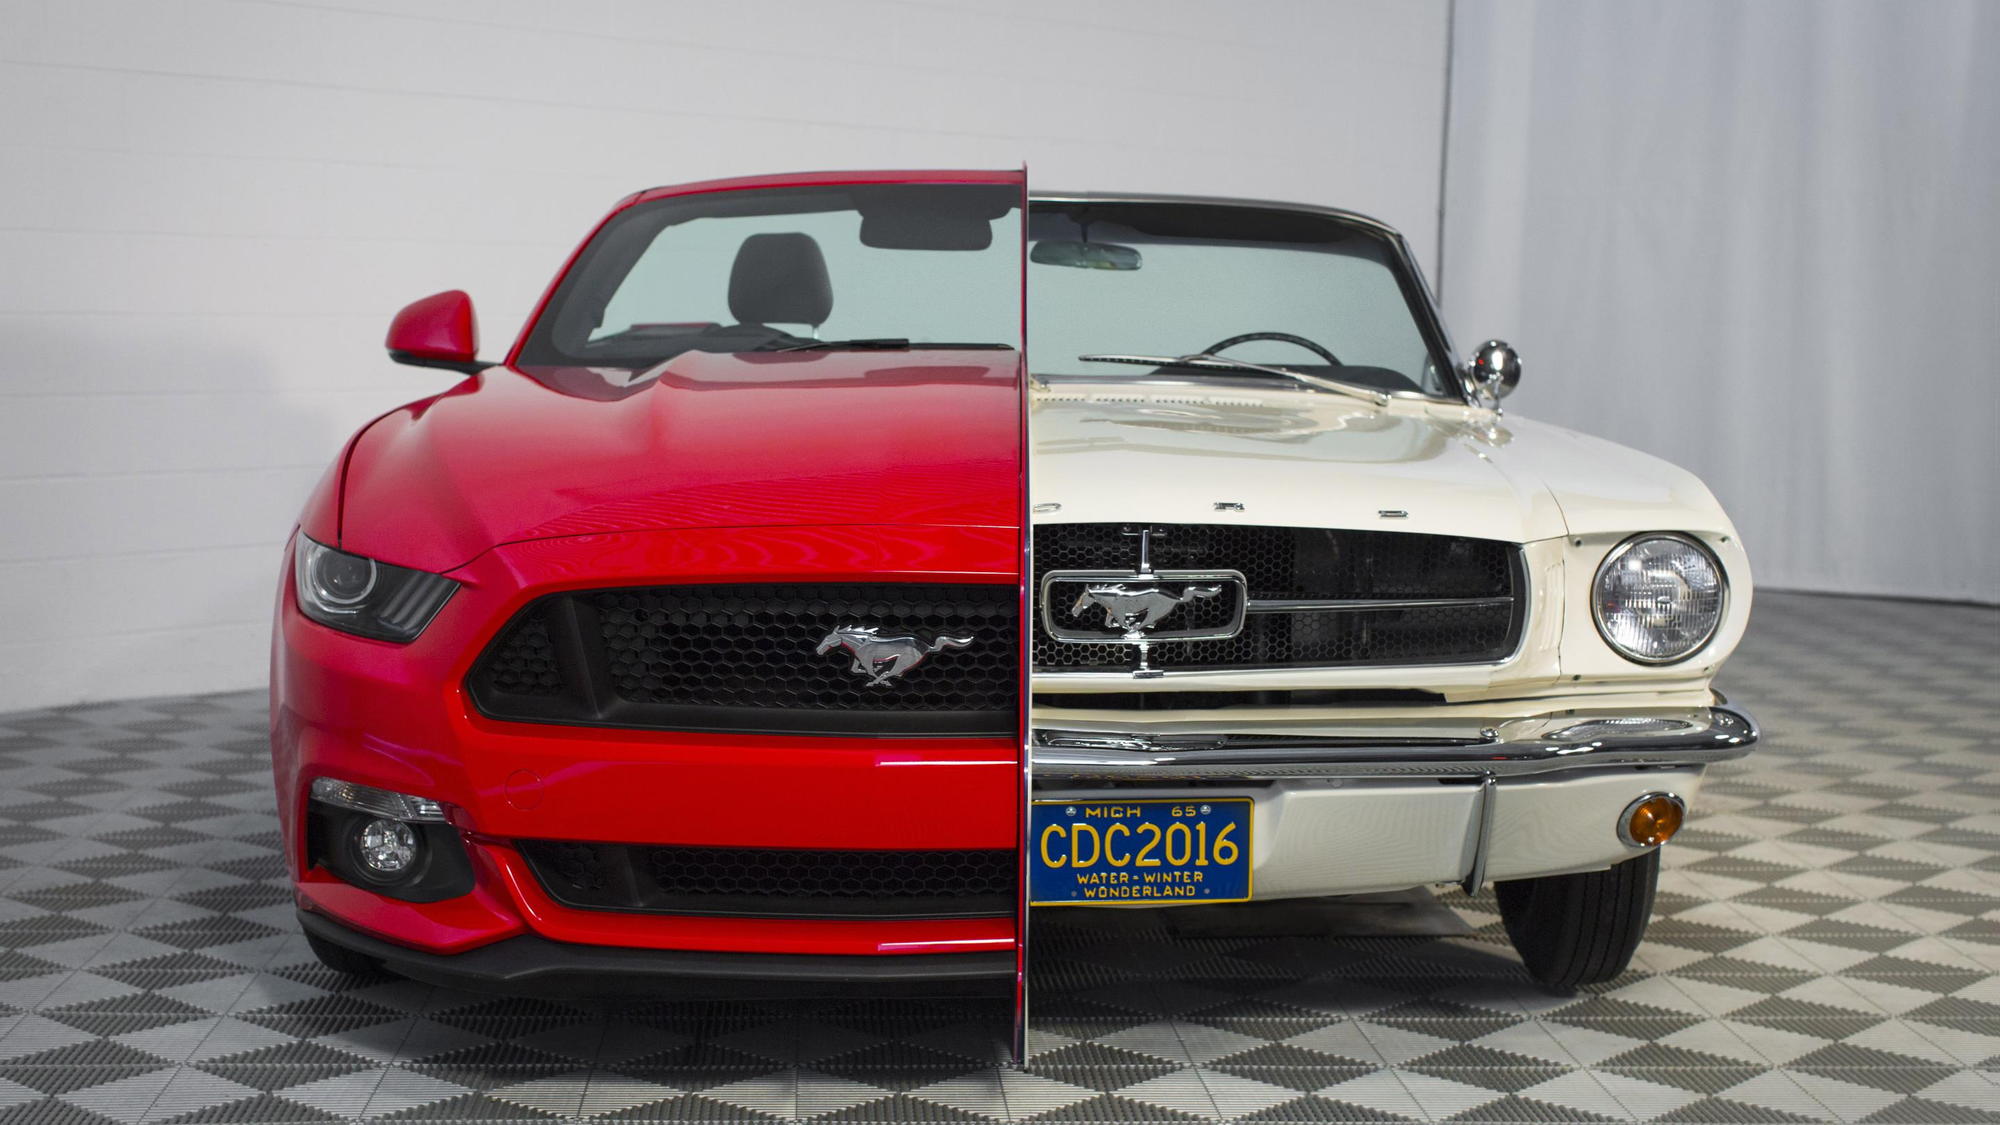 Side-by-side Ford Mustangs at the National Inventors Hall of Fame Museum